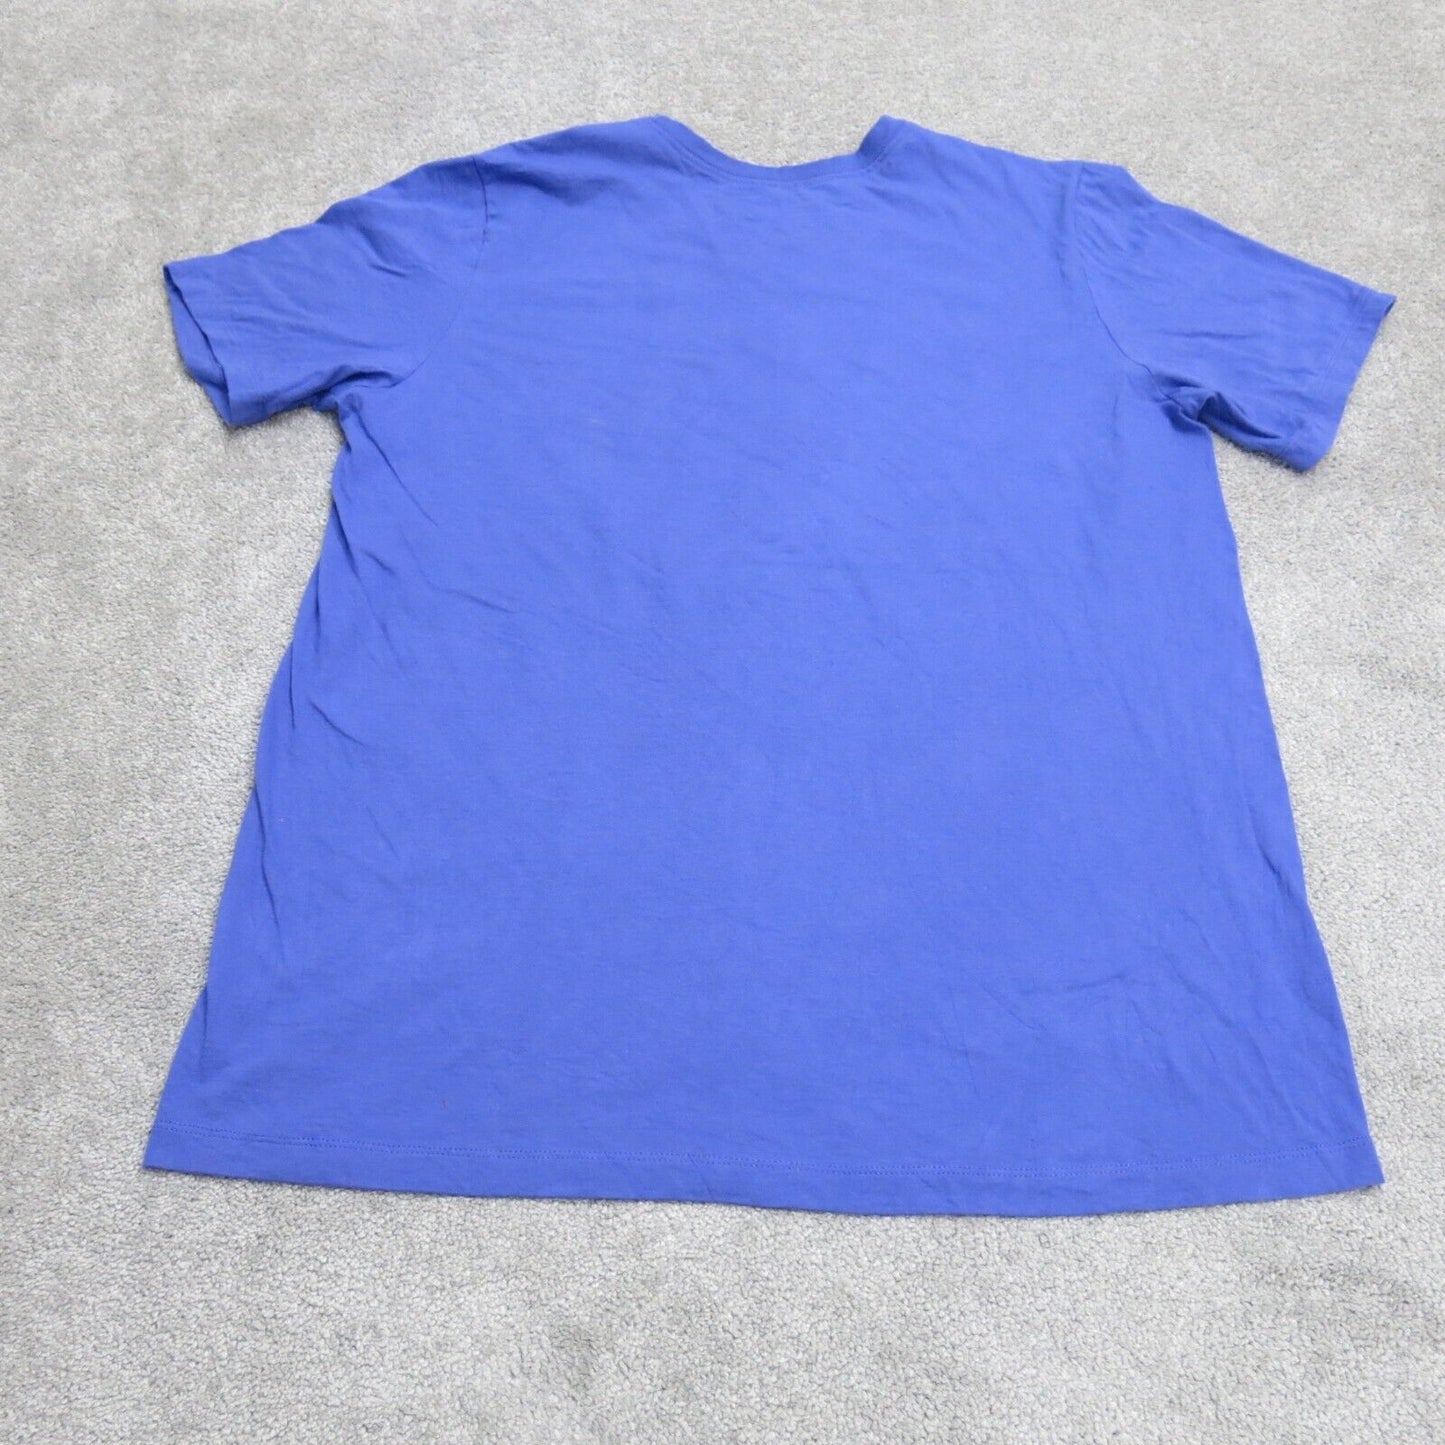 The Nike Tee Mens Crew Neck T Shirt Short Sleeves Graphic Tee Blue Size Large